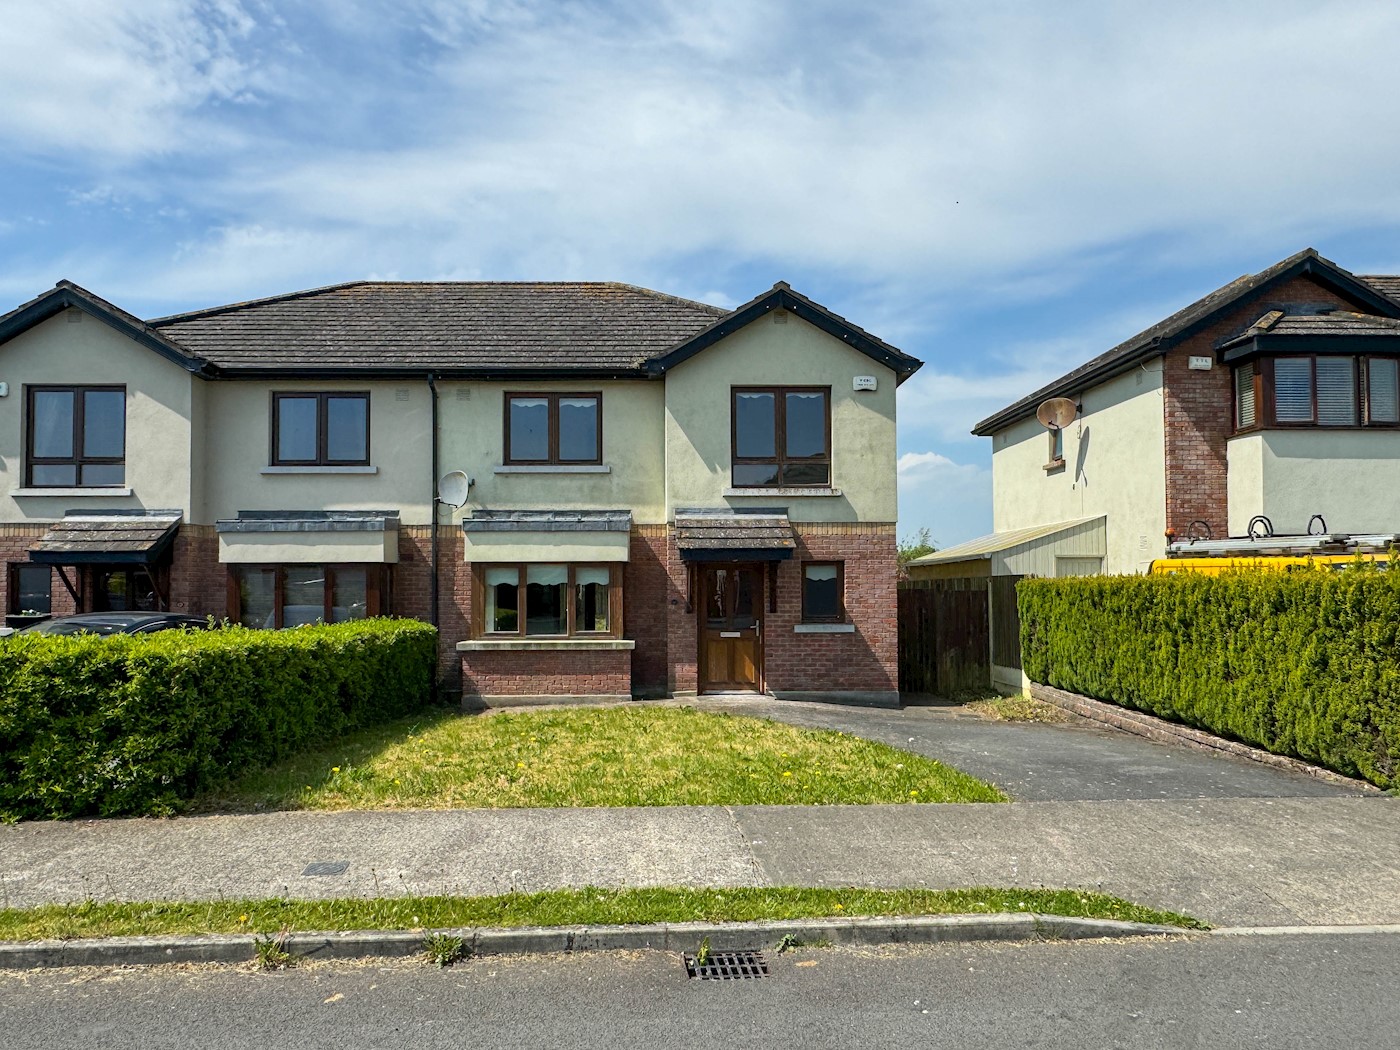 22 Russell Close, Gracefield Manor, Ballylynan, Co. Laois, R14 W938 1/28